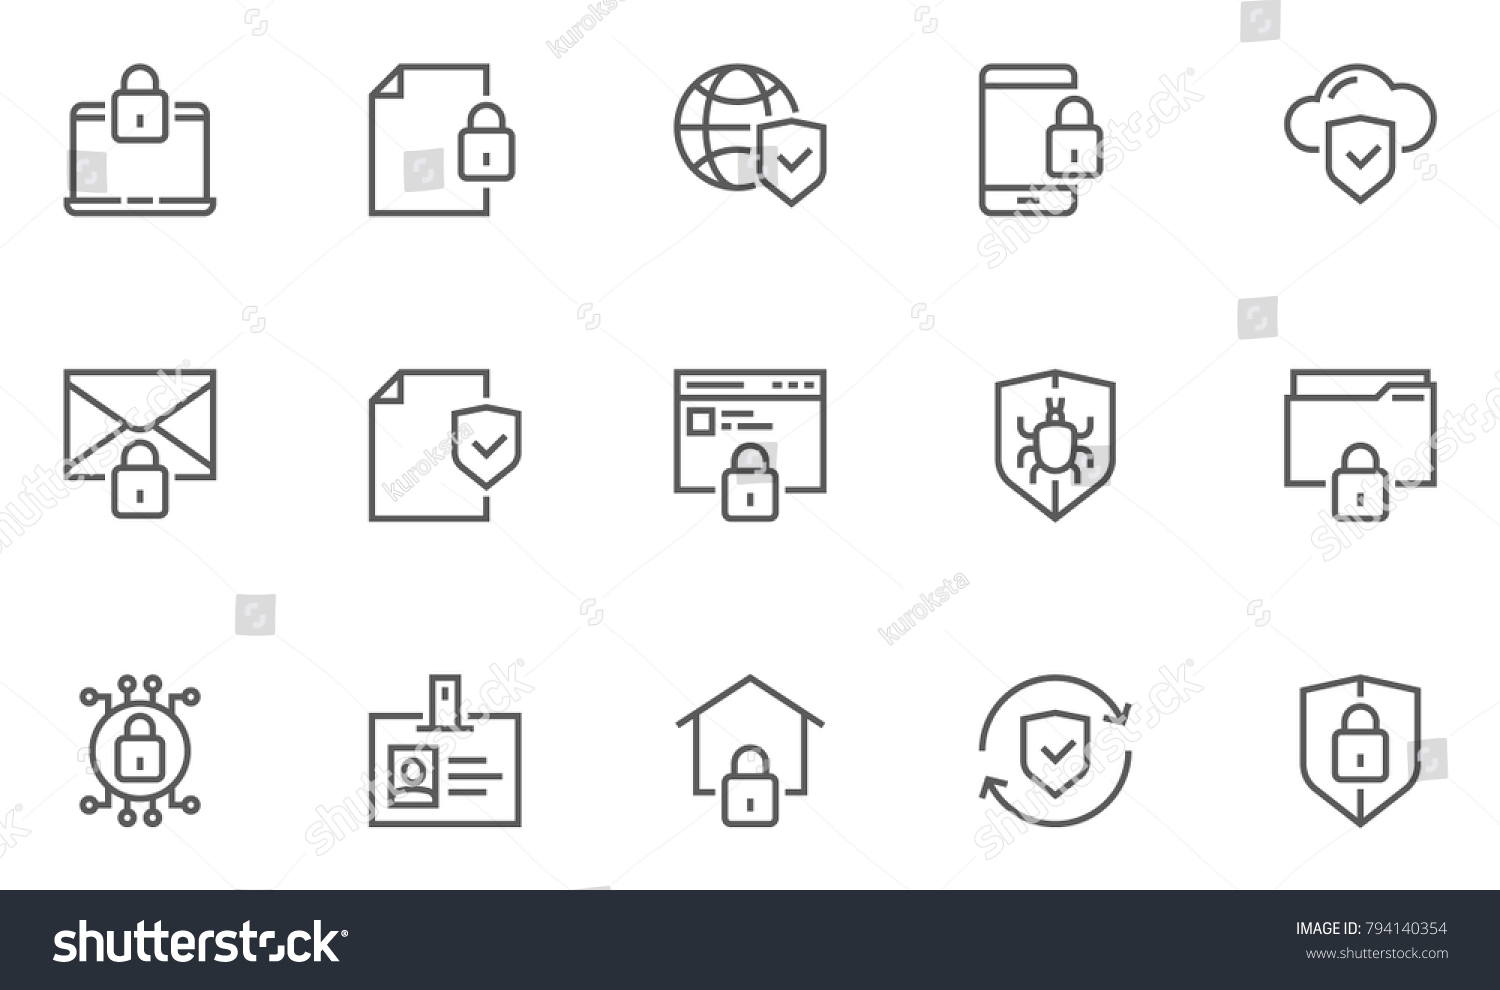 Protection and Security Vector Line Icons Set. Business Data Protection Technology, Cyber Security, Computer Network Protection. Editable Stroke. 48x48 Pixel Perfect. #794140354